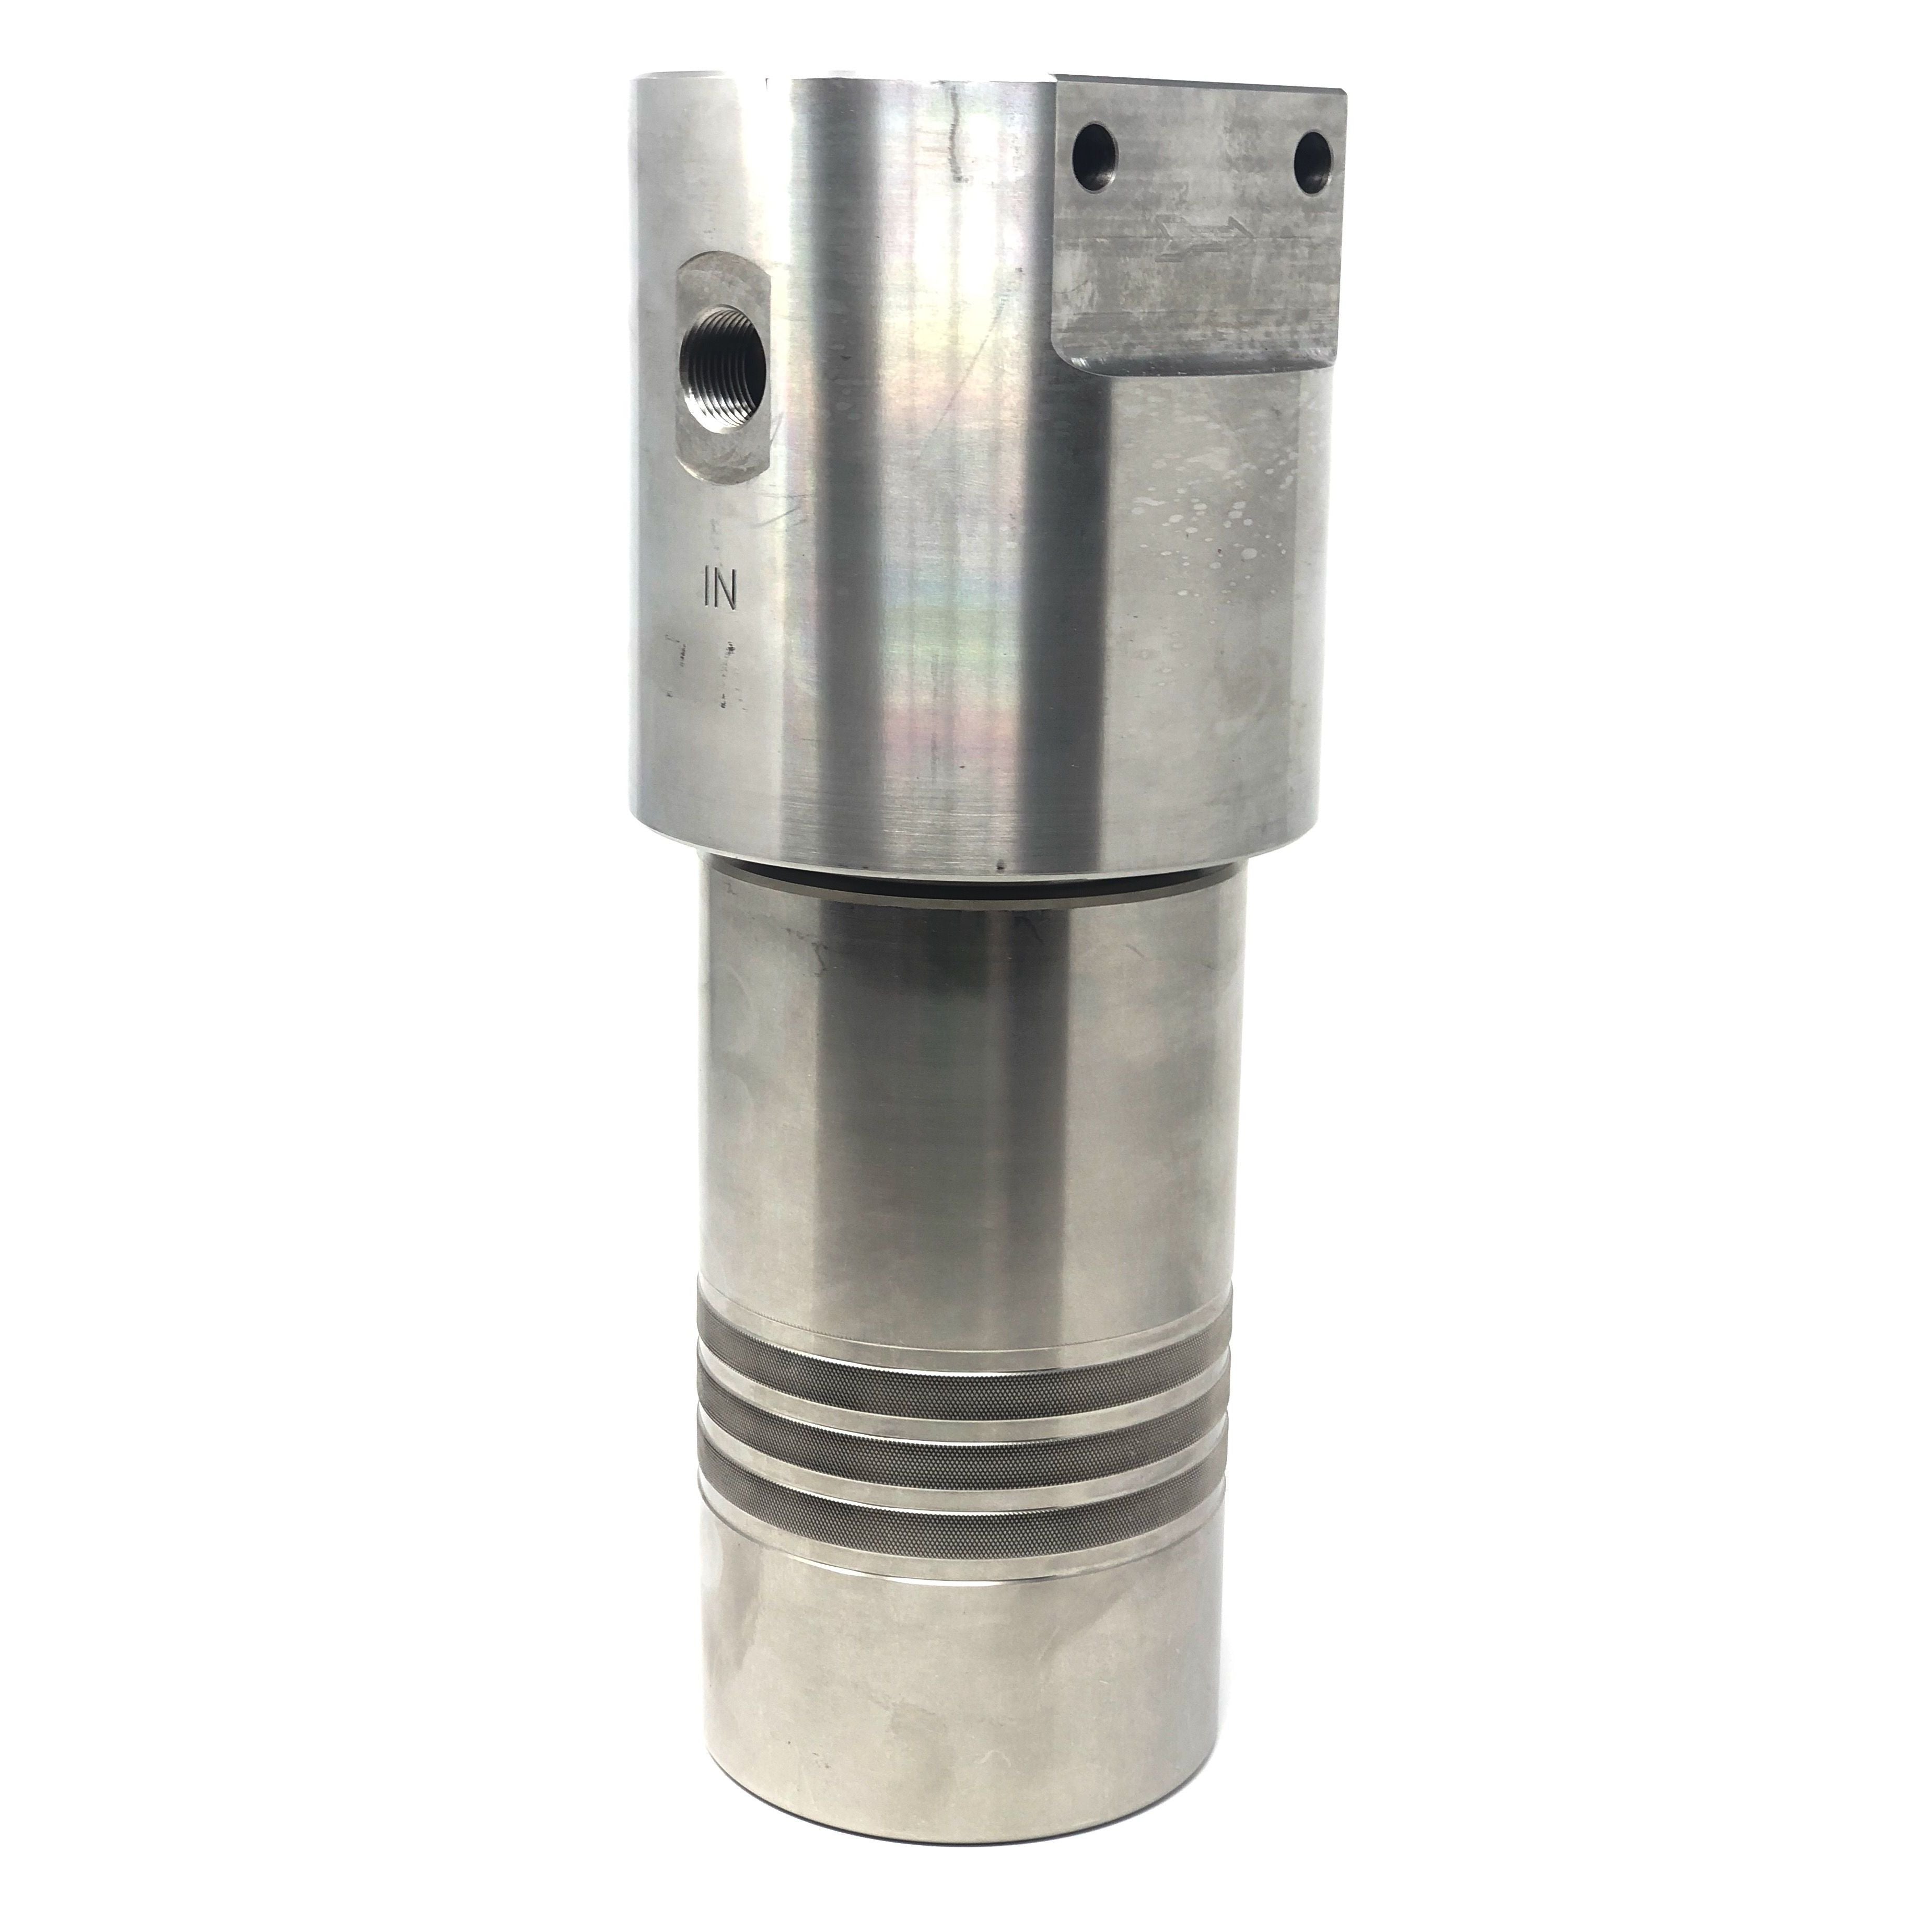 52S-246S-3MDN : Chase Ultra High Pressure Inline Filter, 10000psi, #6 SAE (3/8"), 3 Micron, With Visual Indicator, No Bypass